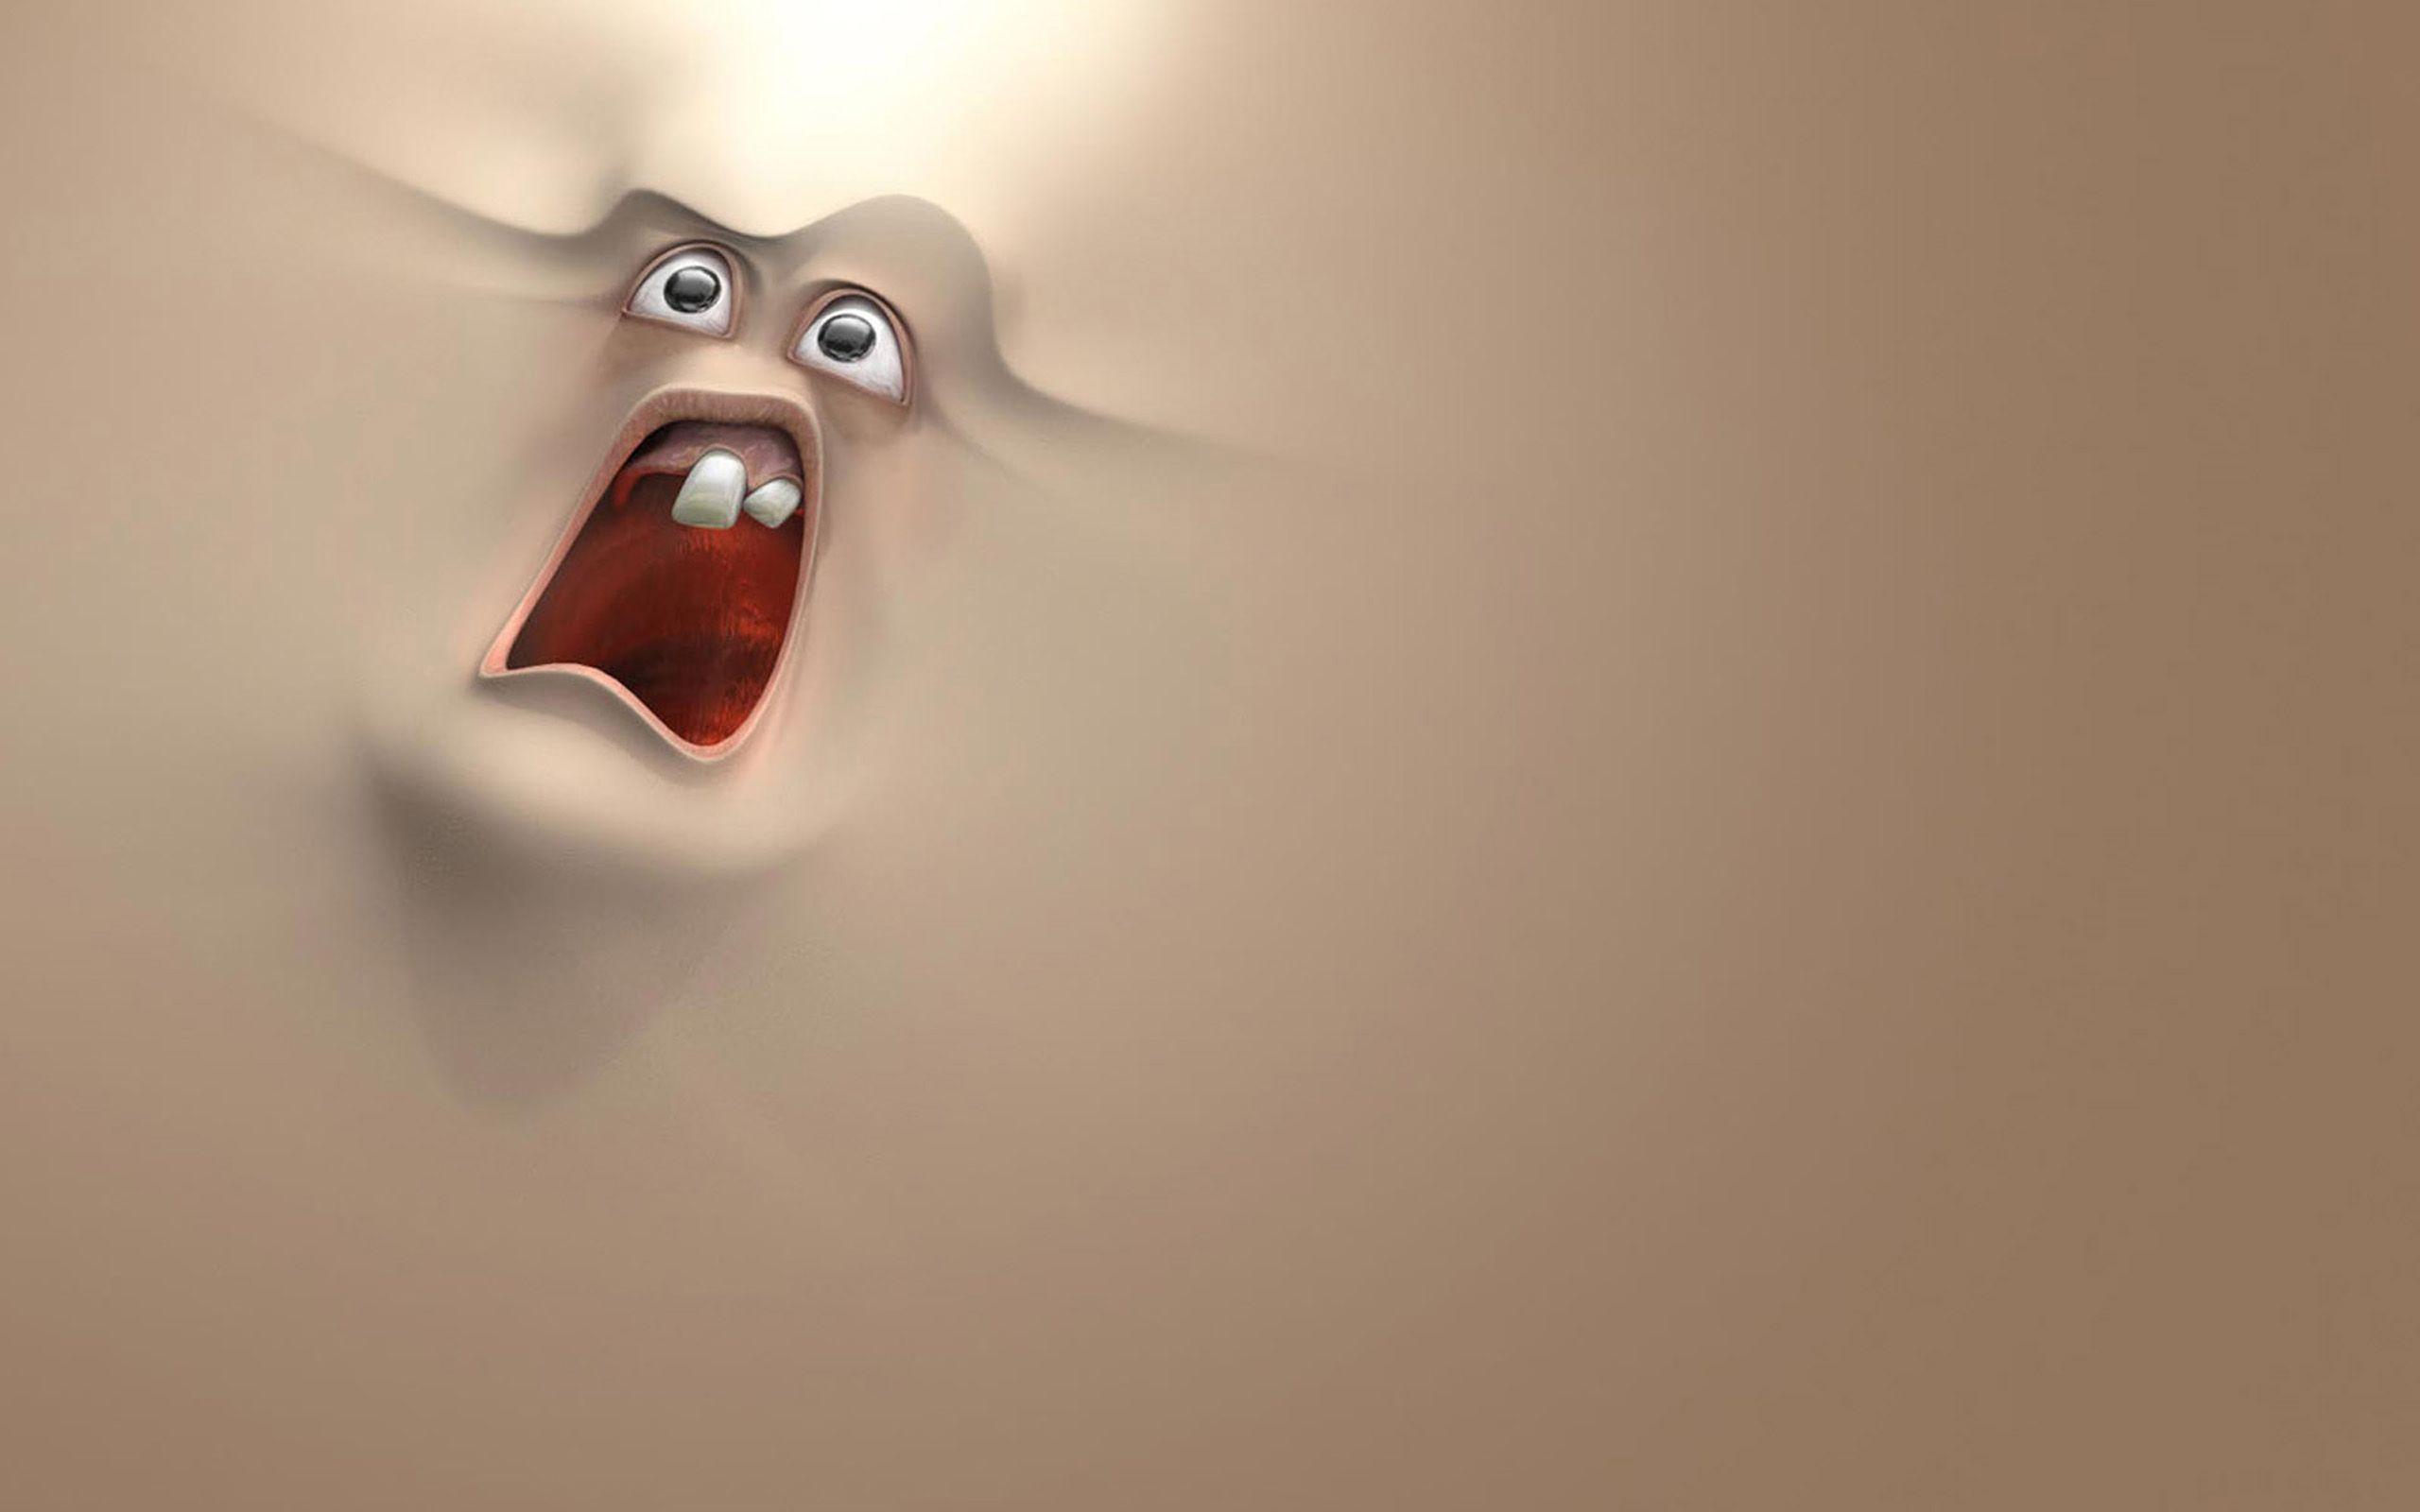 Wallpaper.wiki Funny Face Cartoon 3D Animated Wallpaper PIC